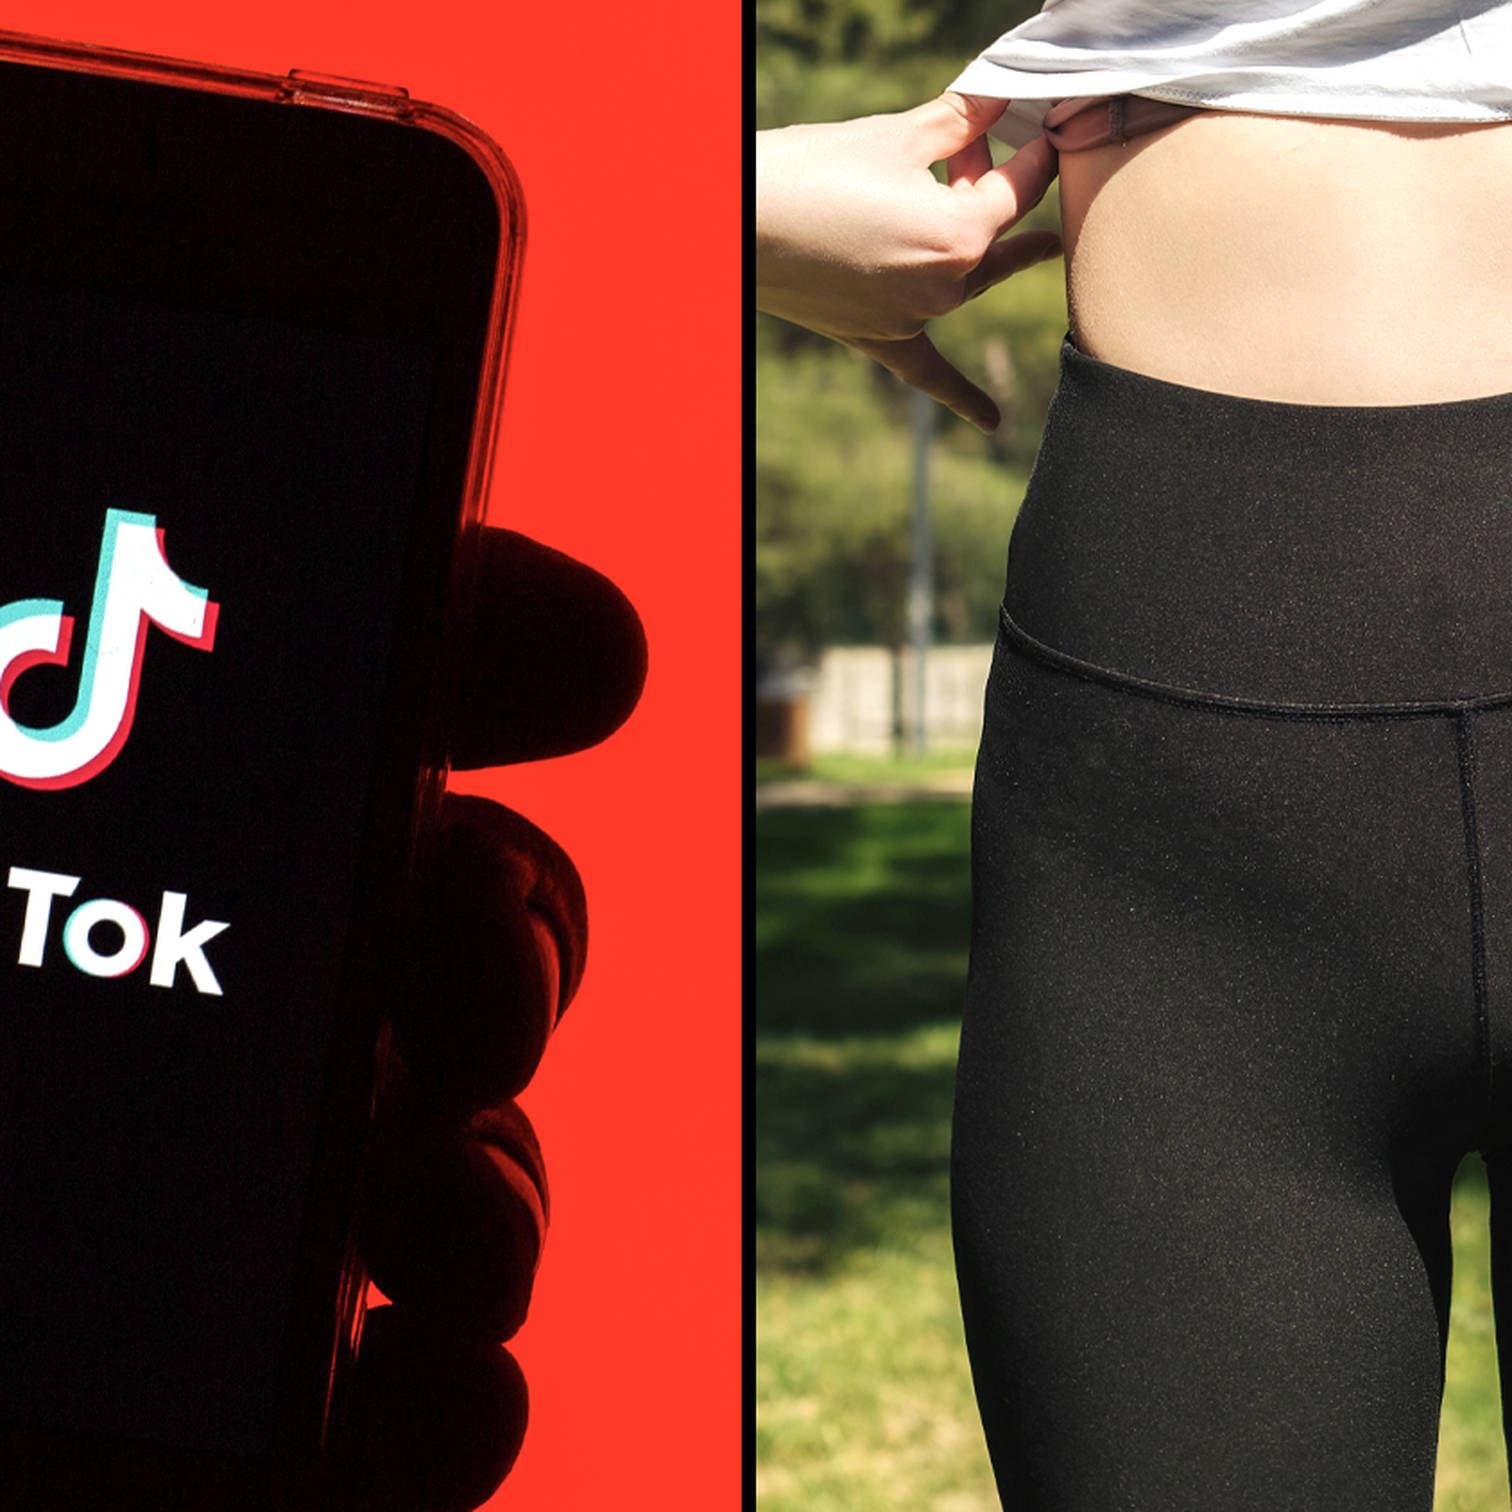 What Are 'Legging Legs' And Why Are Women Revolting Against The Term? The  Viral TikTok Trend Explained